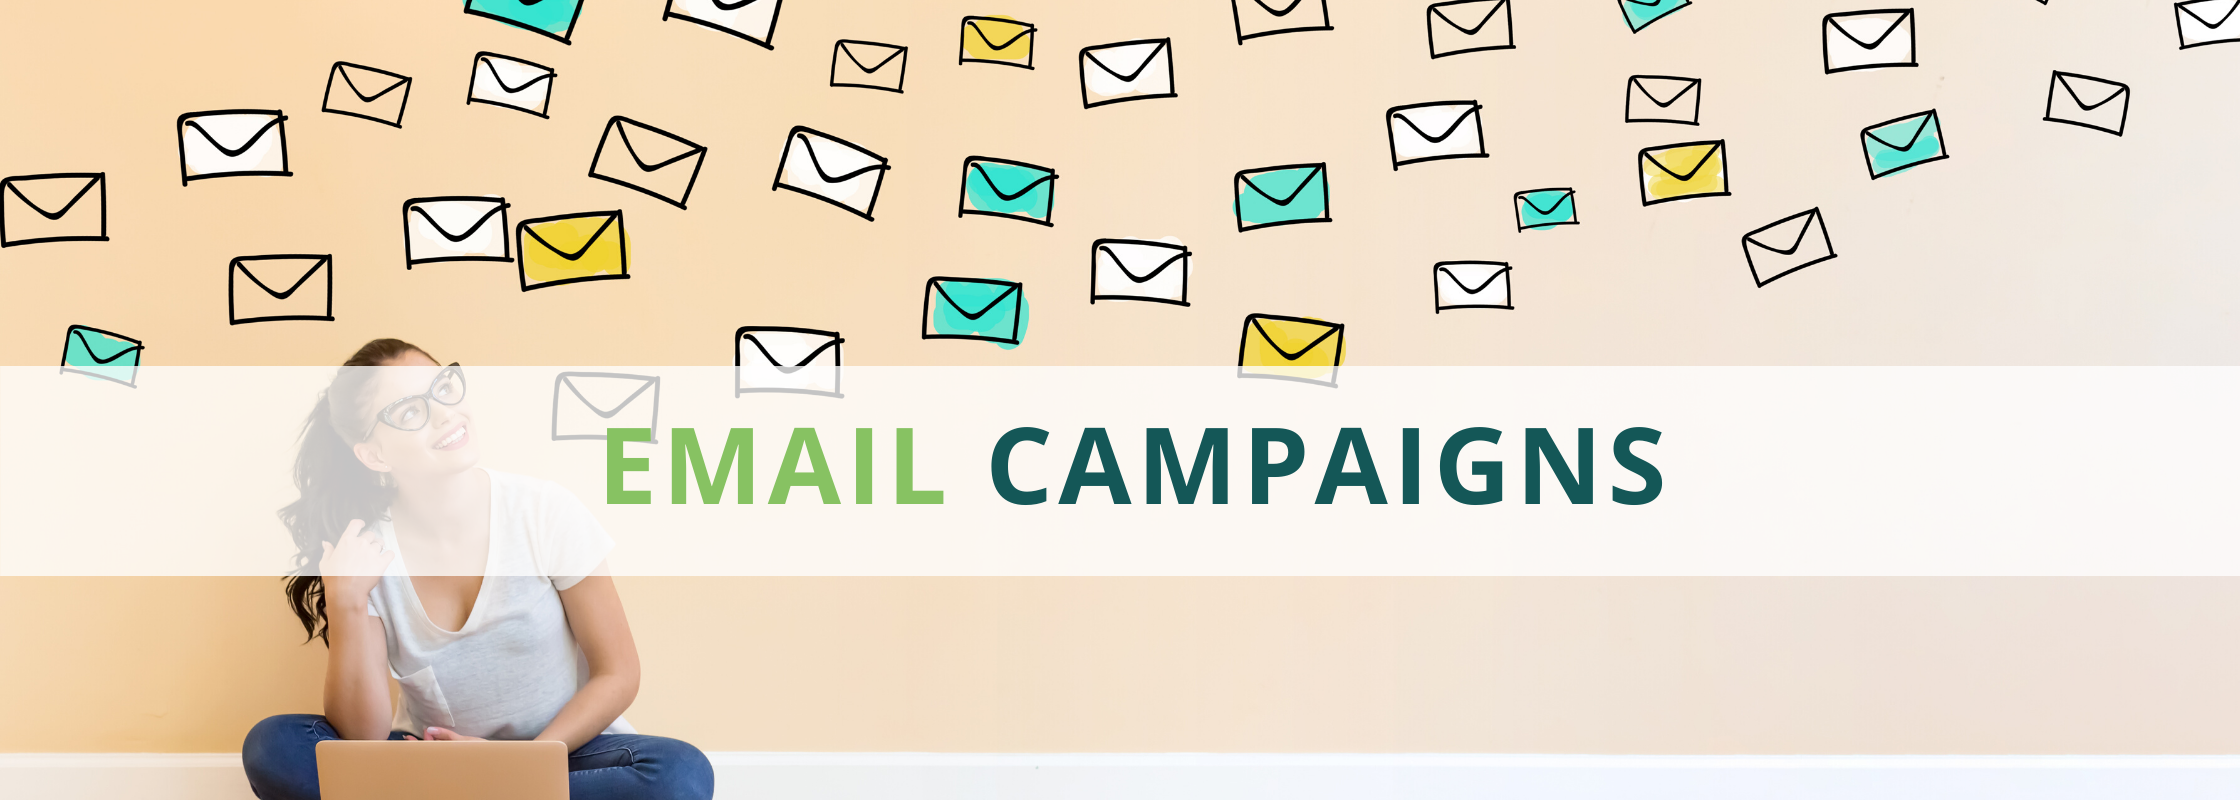 Email Marketing Campaigns - Outsourced marketing service South Wales